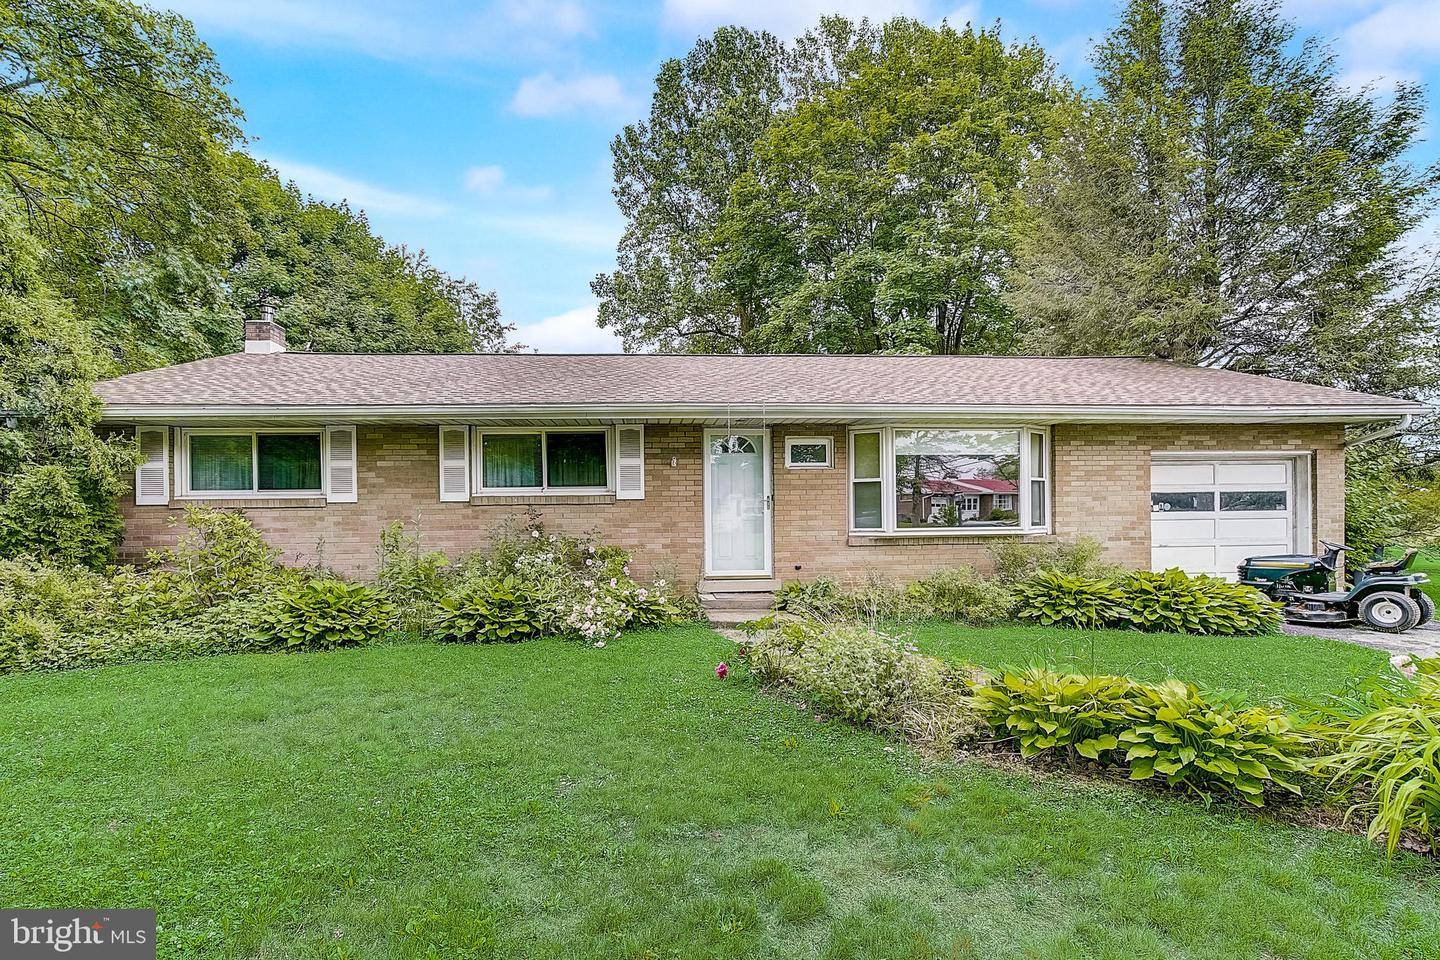 
	1621 Mark Twain Circle, Bethlehem, PA 18017 | MLS PANH108306 | Listing Information | Homes for Sale and Rent
